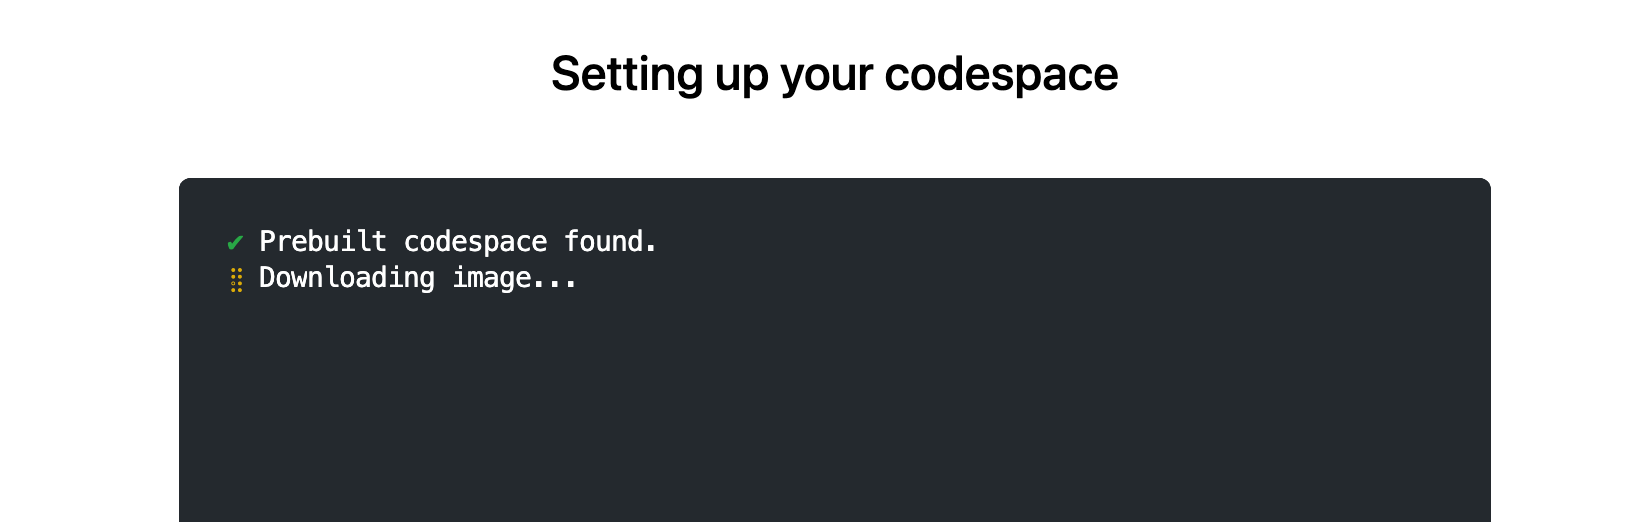 Screenshot of the "Setting up your codespace" page, with the text: "Prebuilt codespace found. Downloading image."